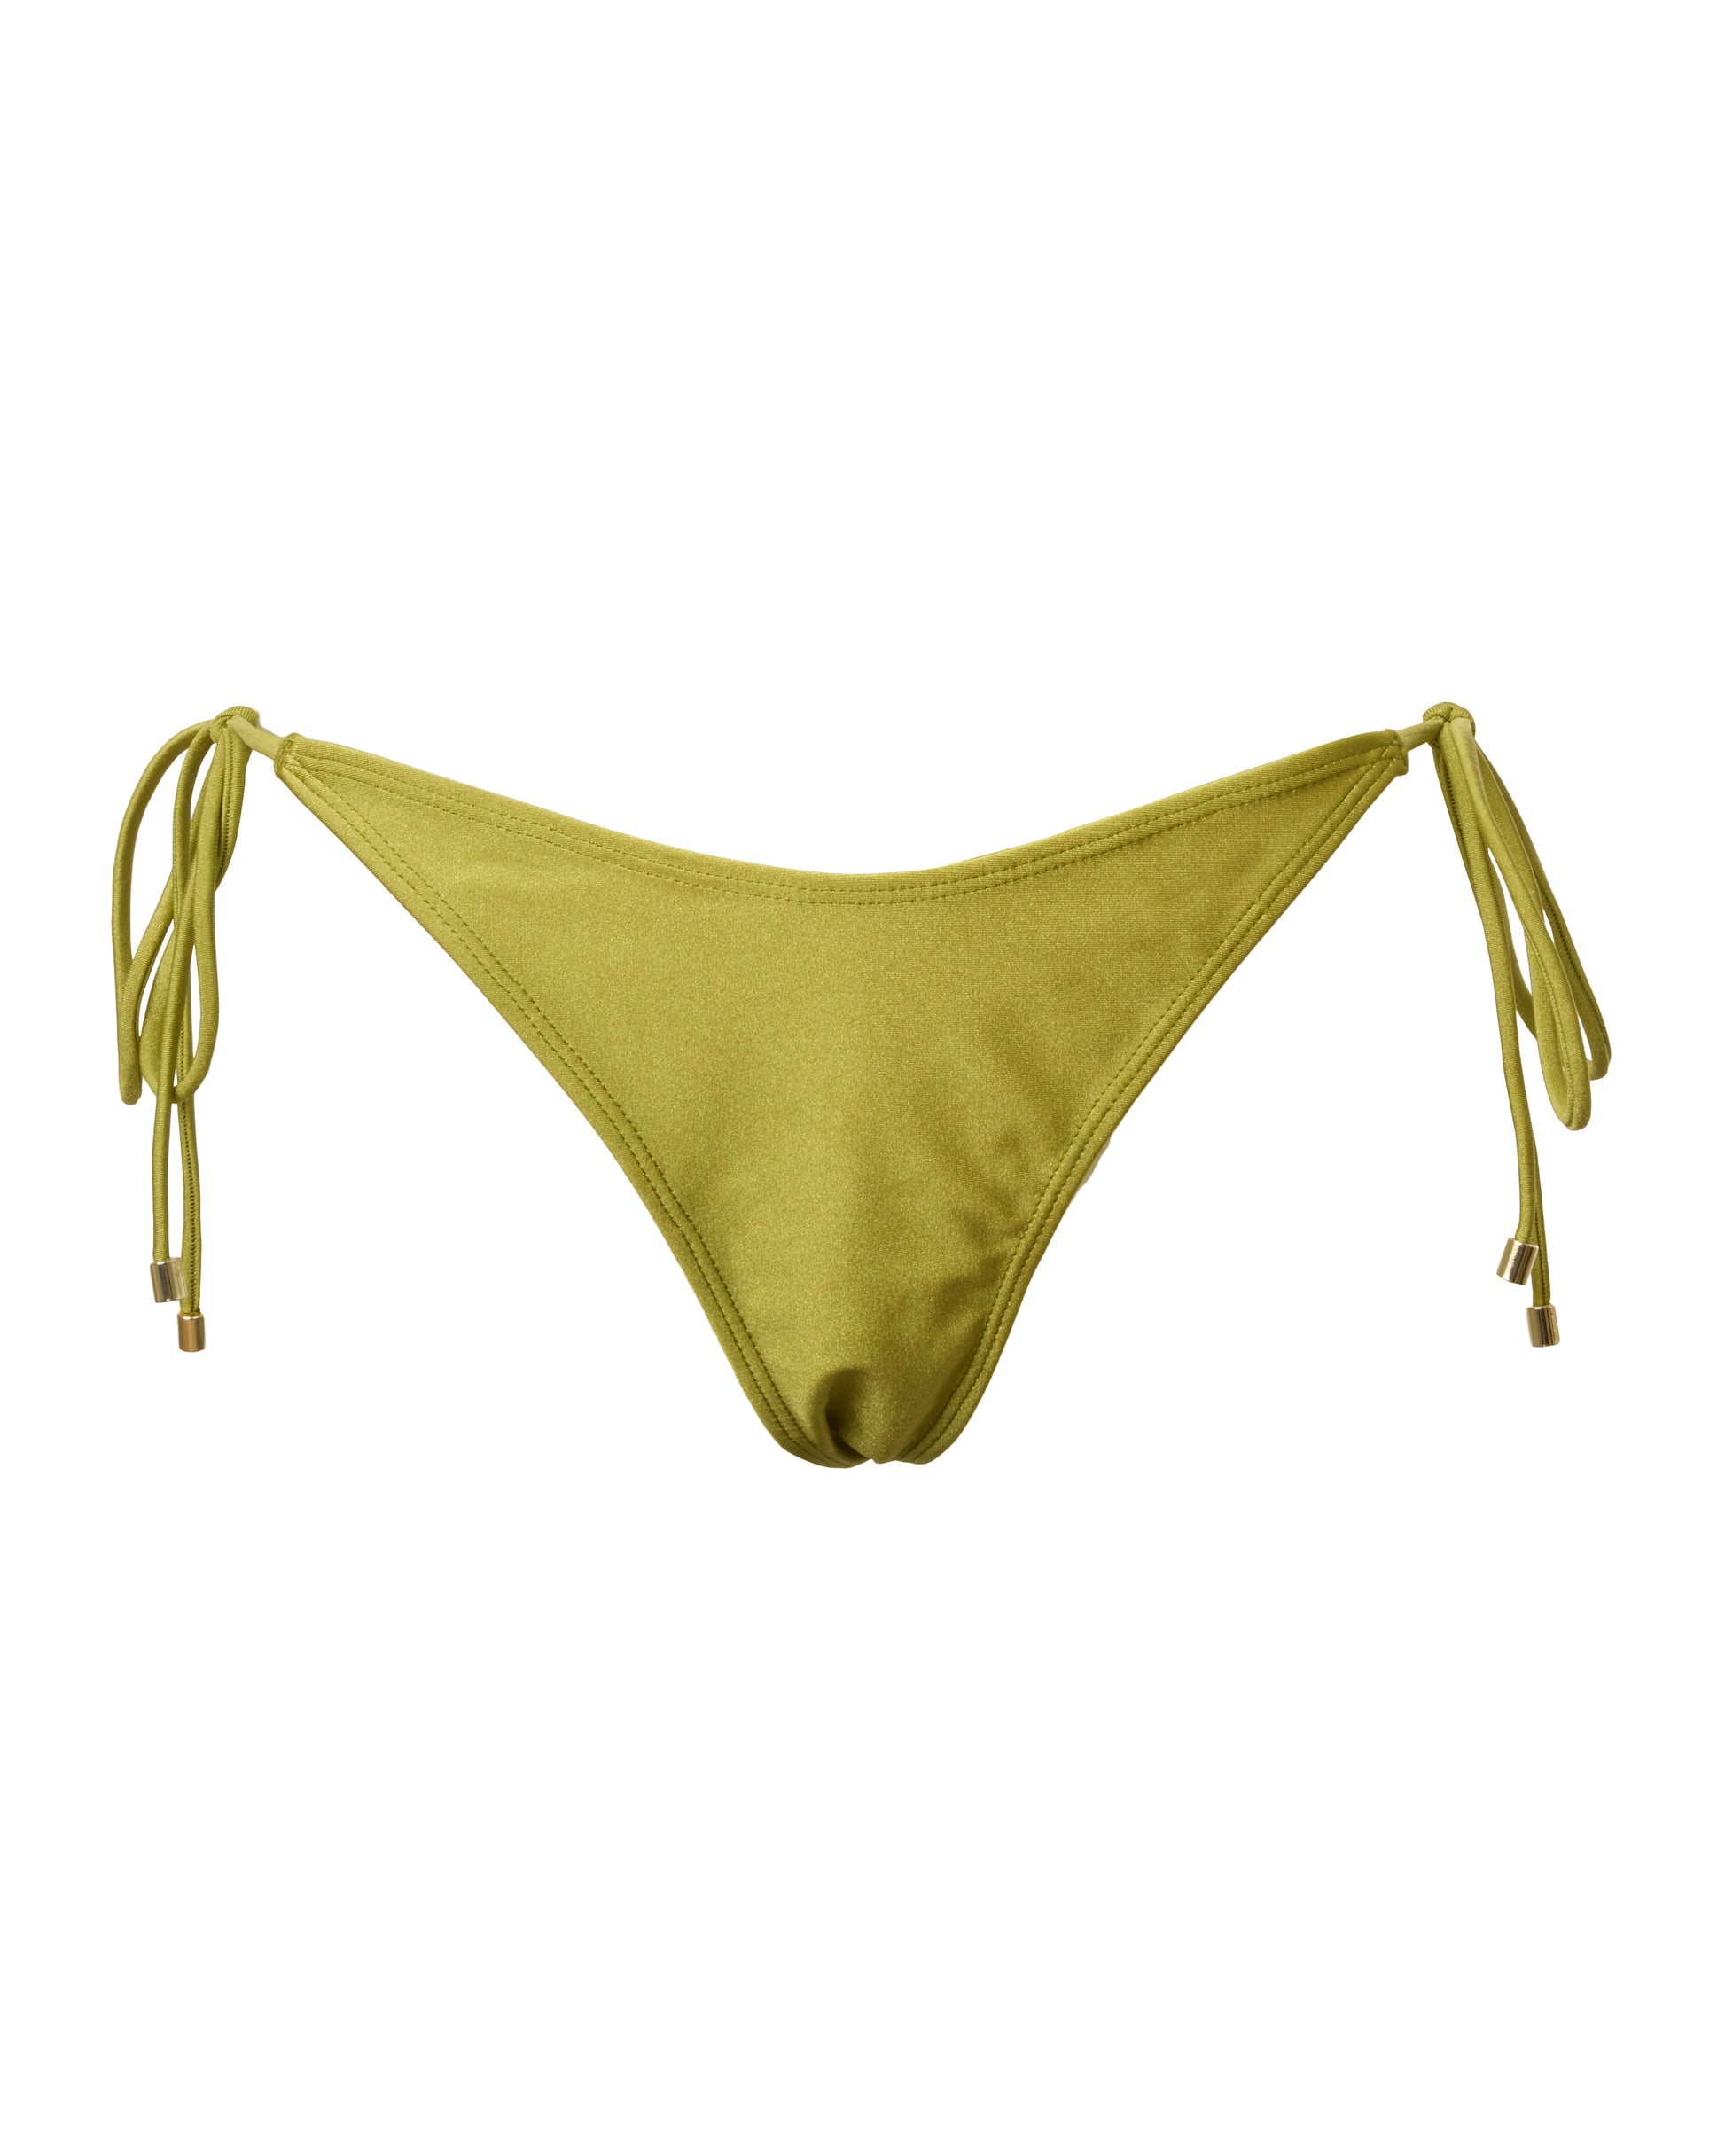 Mounia bottom. An adjustable and yellow bottom with golden details.